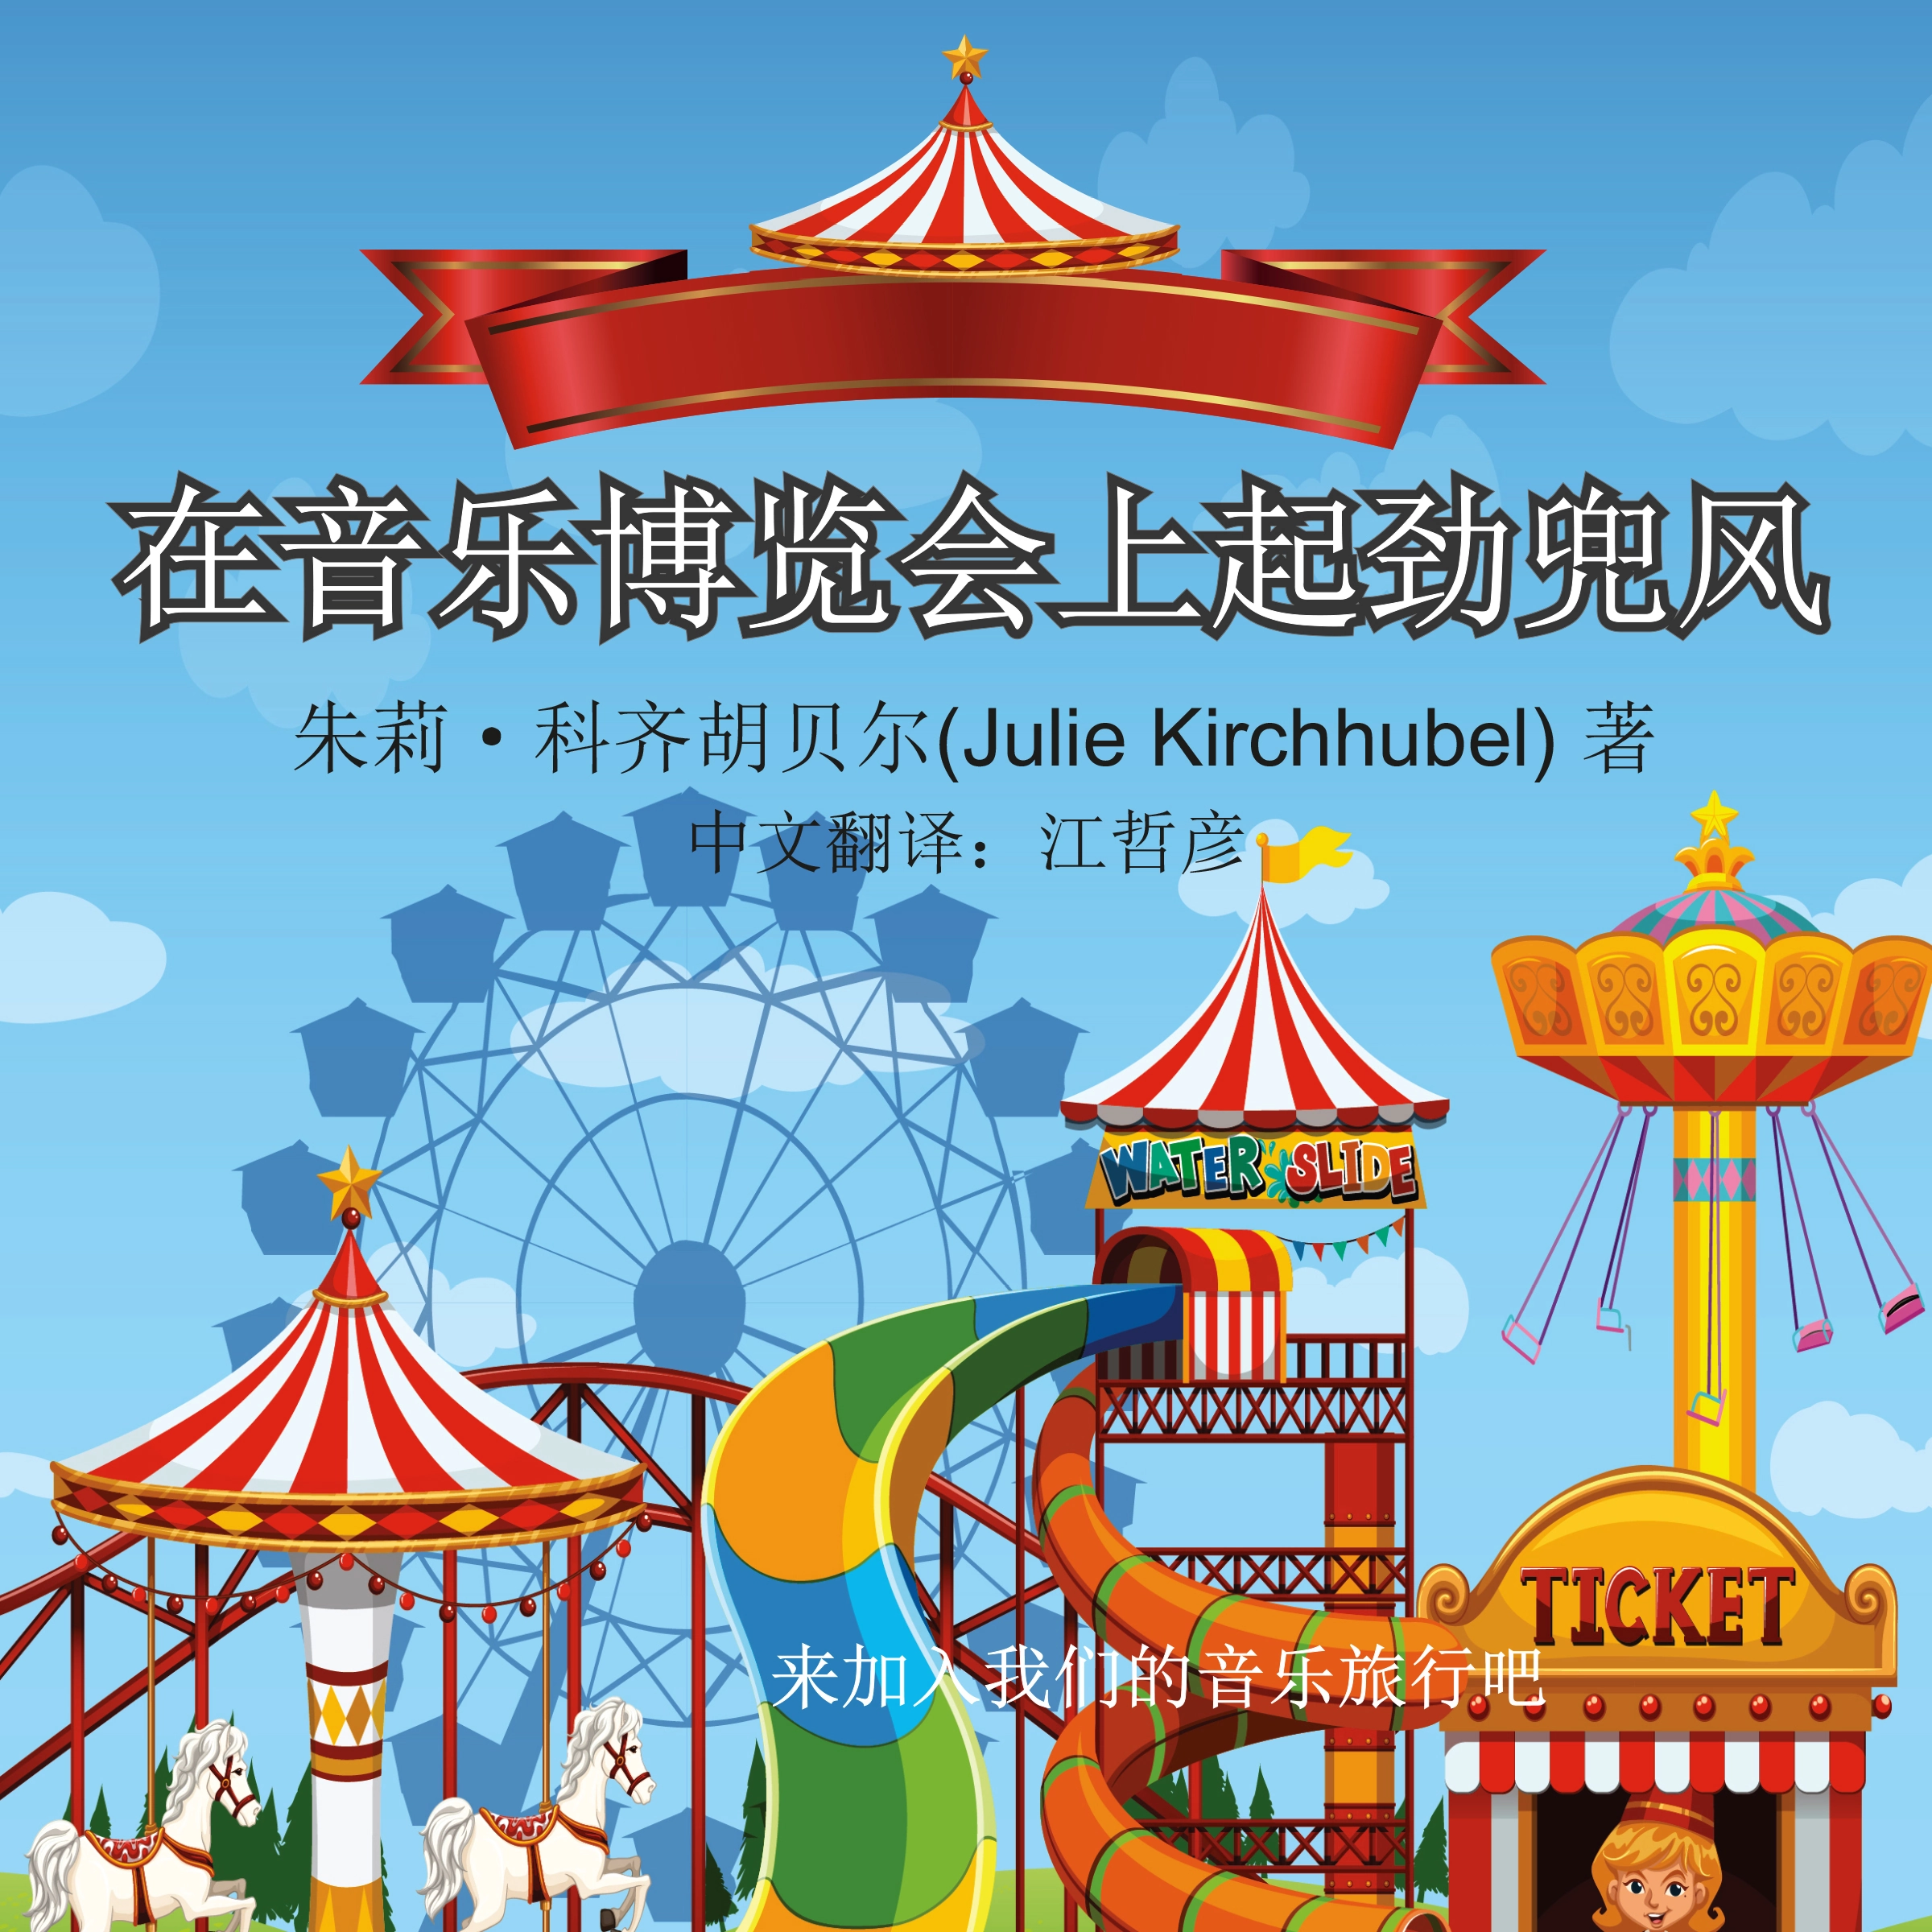 The Big Ride At The Musical Fair - Chinese Audiobook by Julie Kirchhubel